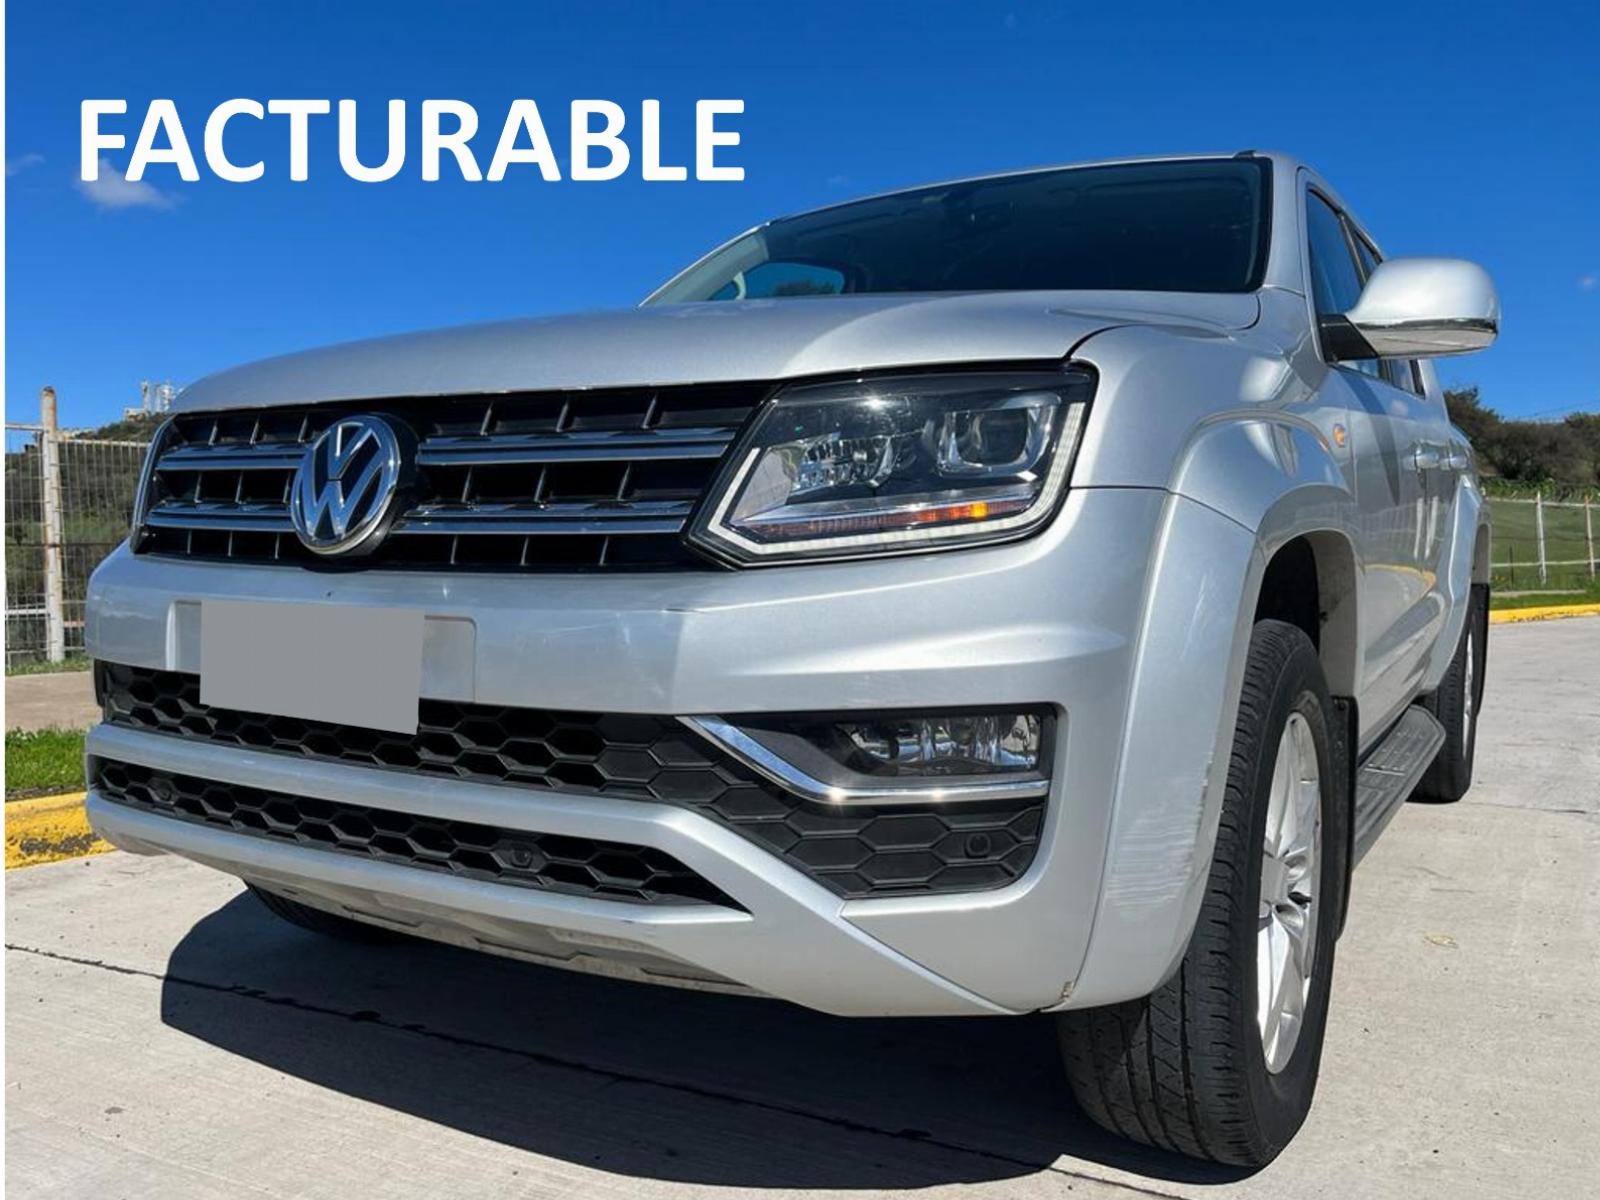 VOLKSWAGEN AMAROK Highline Auto 4wd 2020 Camioneta Impecable FACTURABLE - 